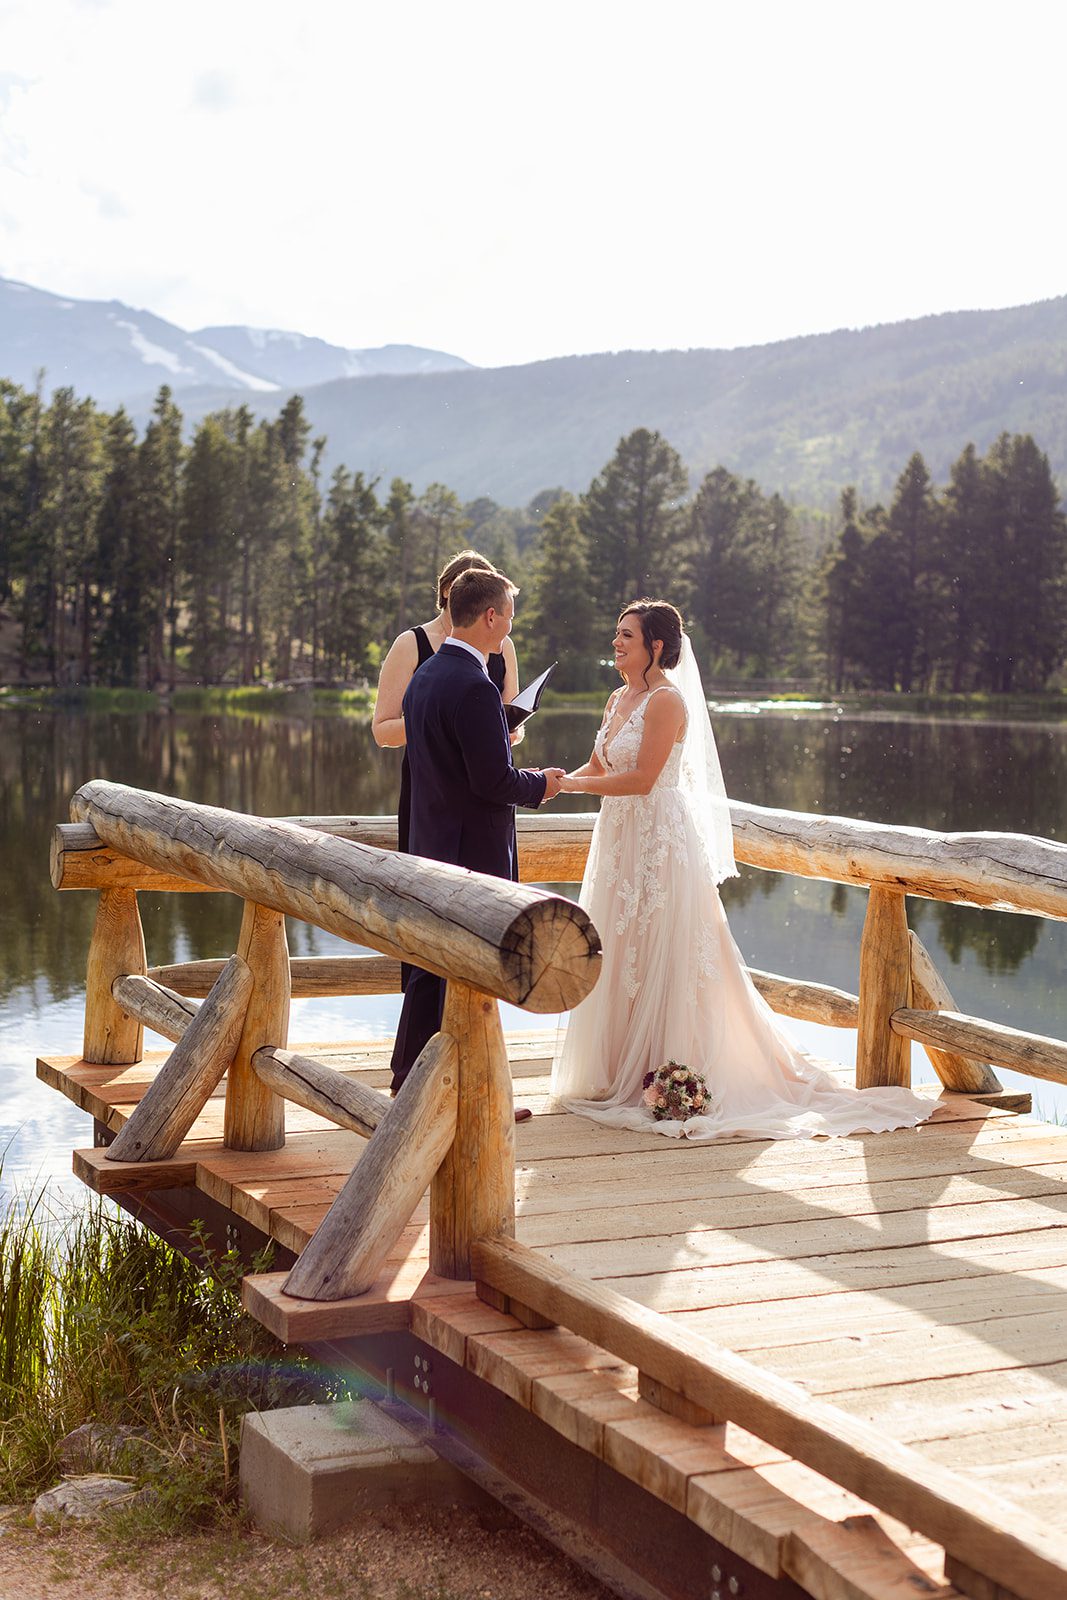 Summer elopement ceremony at sunset in Rocky Mountain National Park